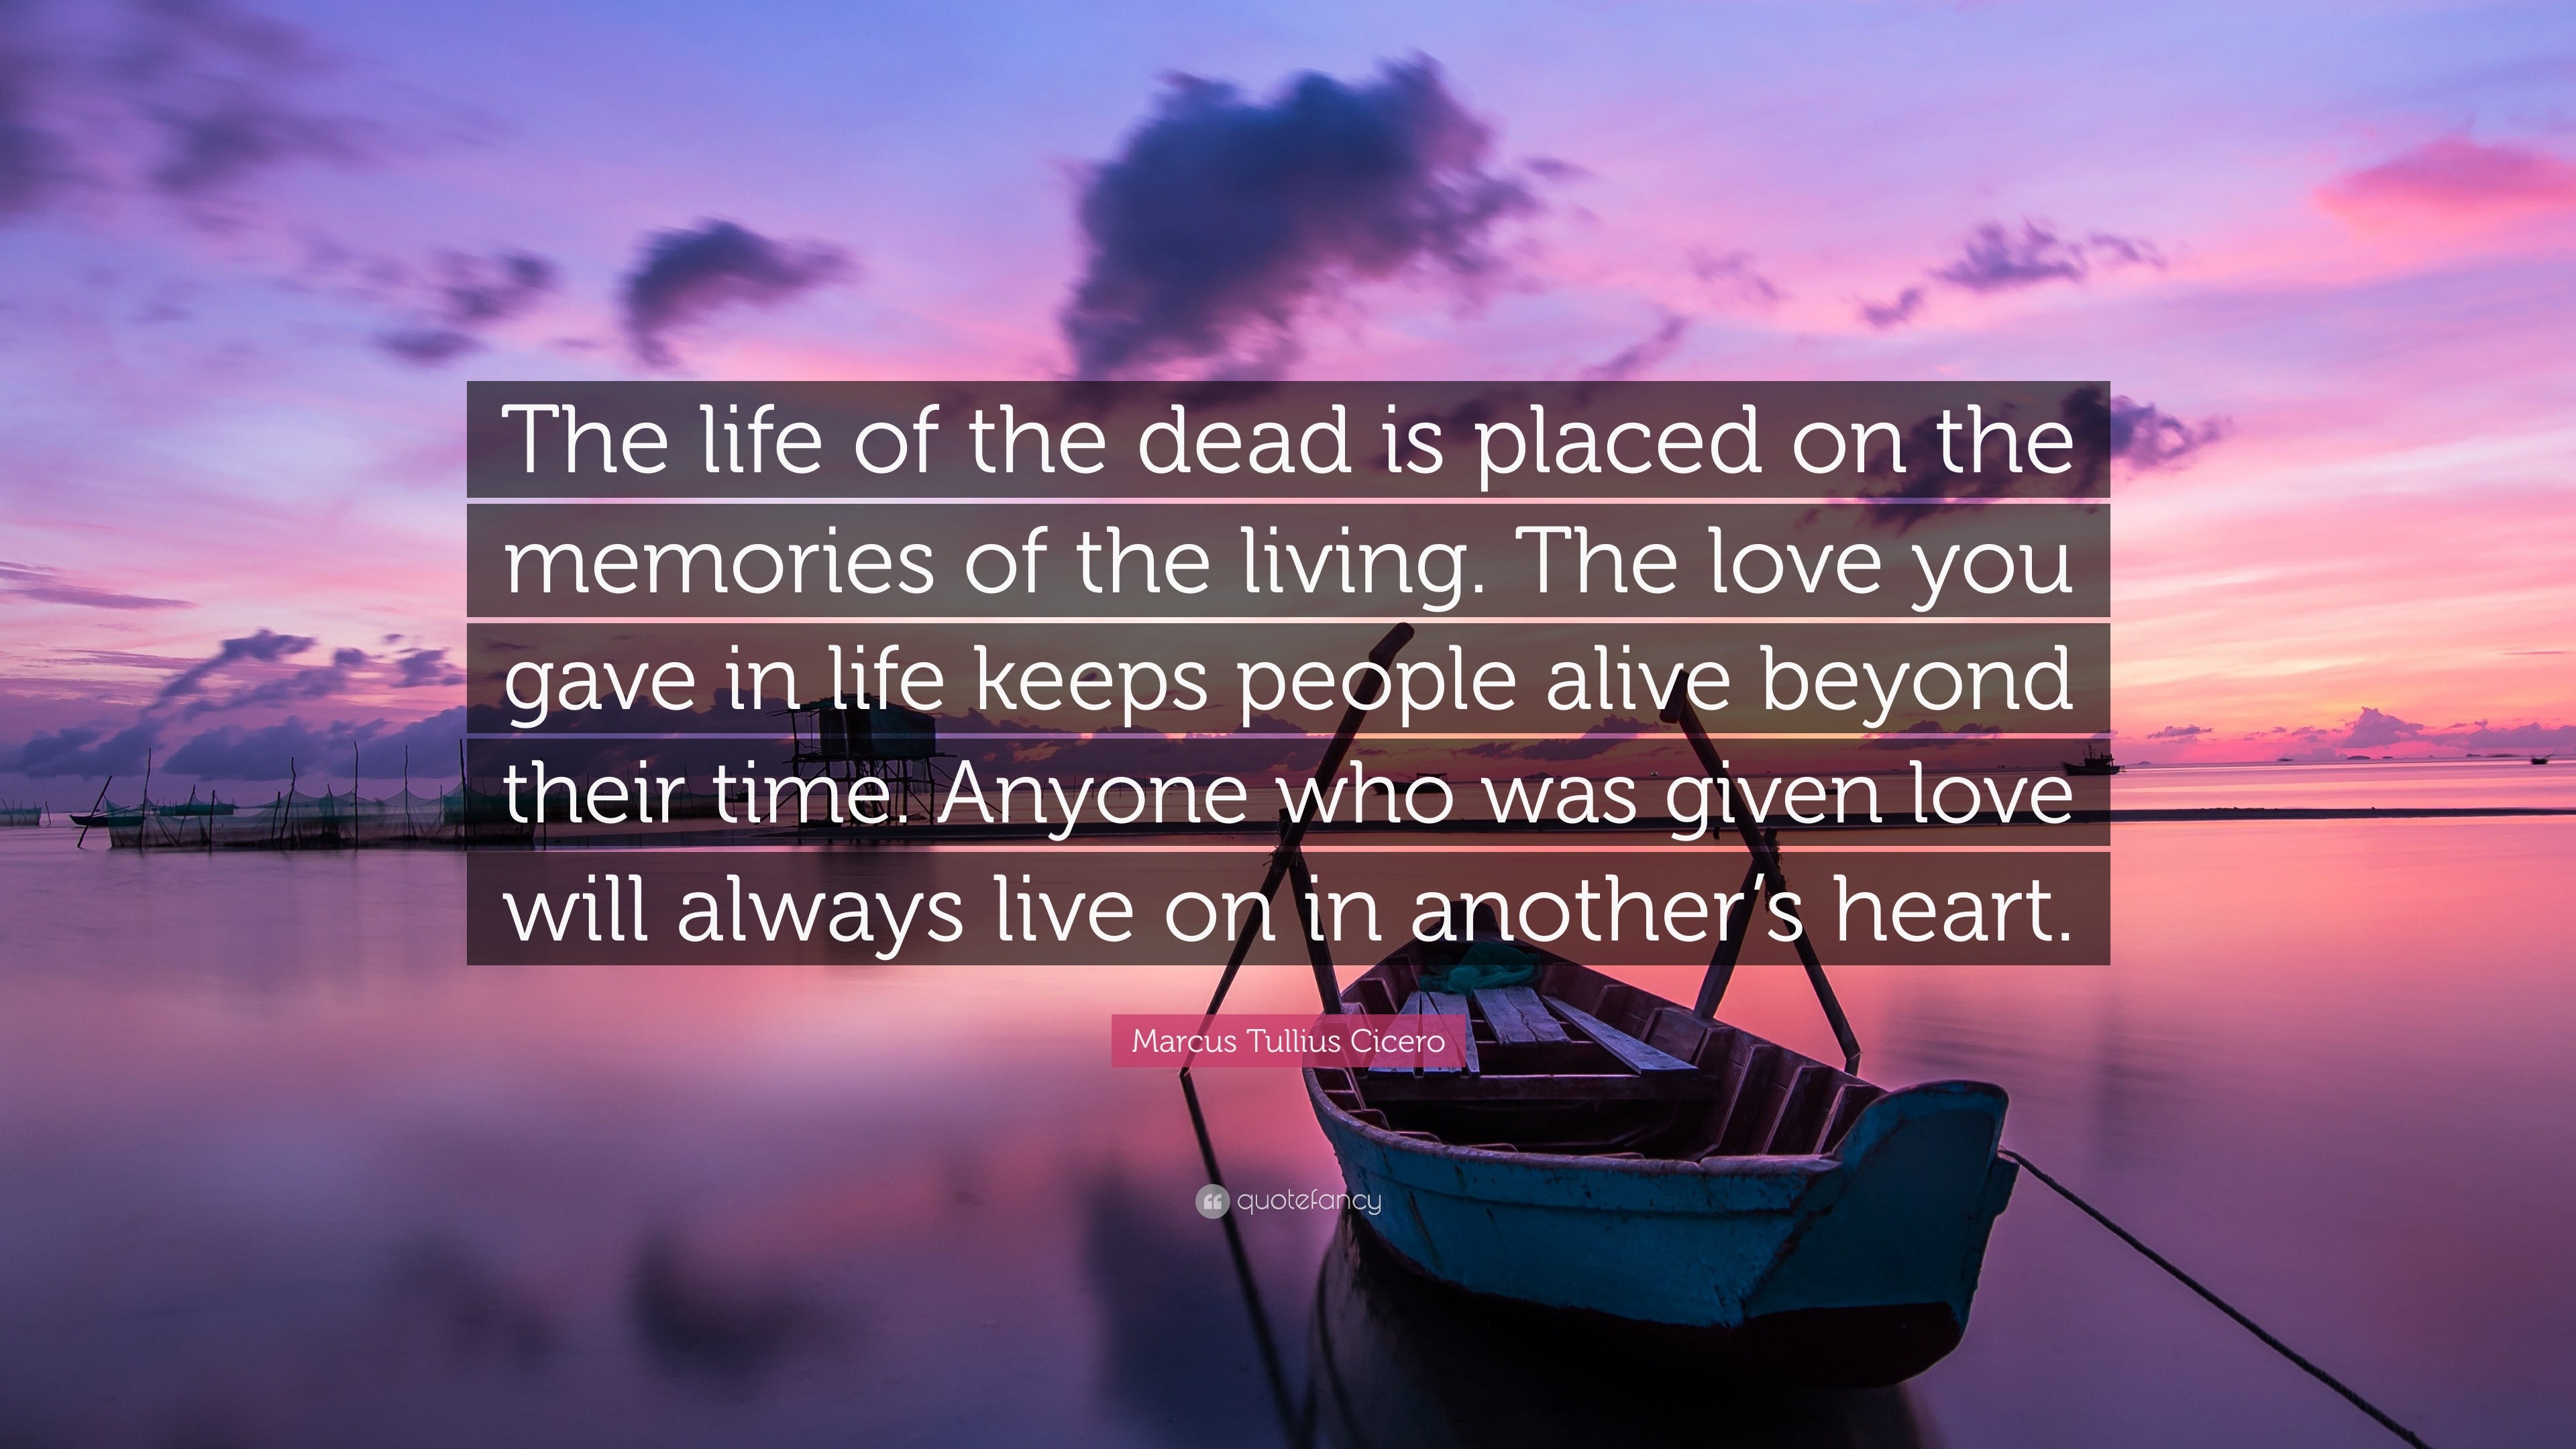 Marcus Tullius Cicero Quote: “The life of the dead is placed on the ...